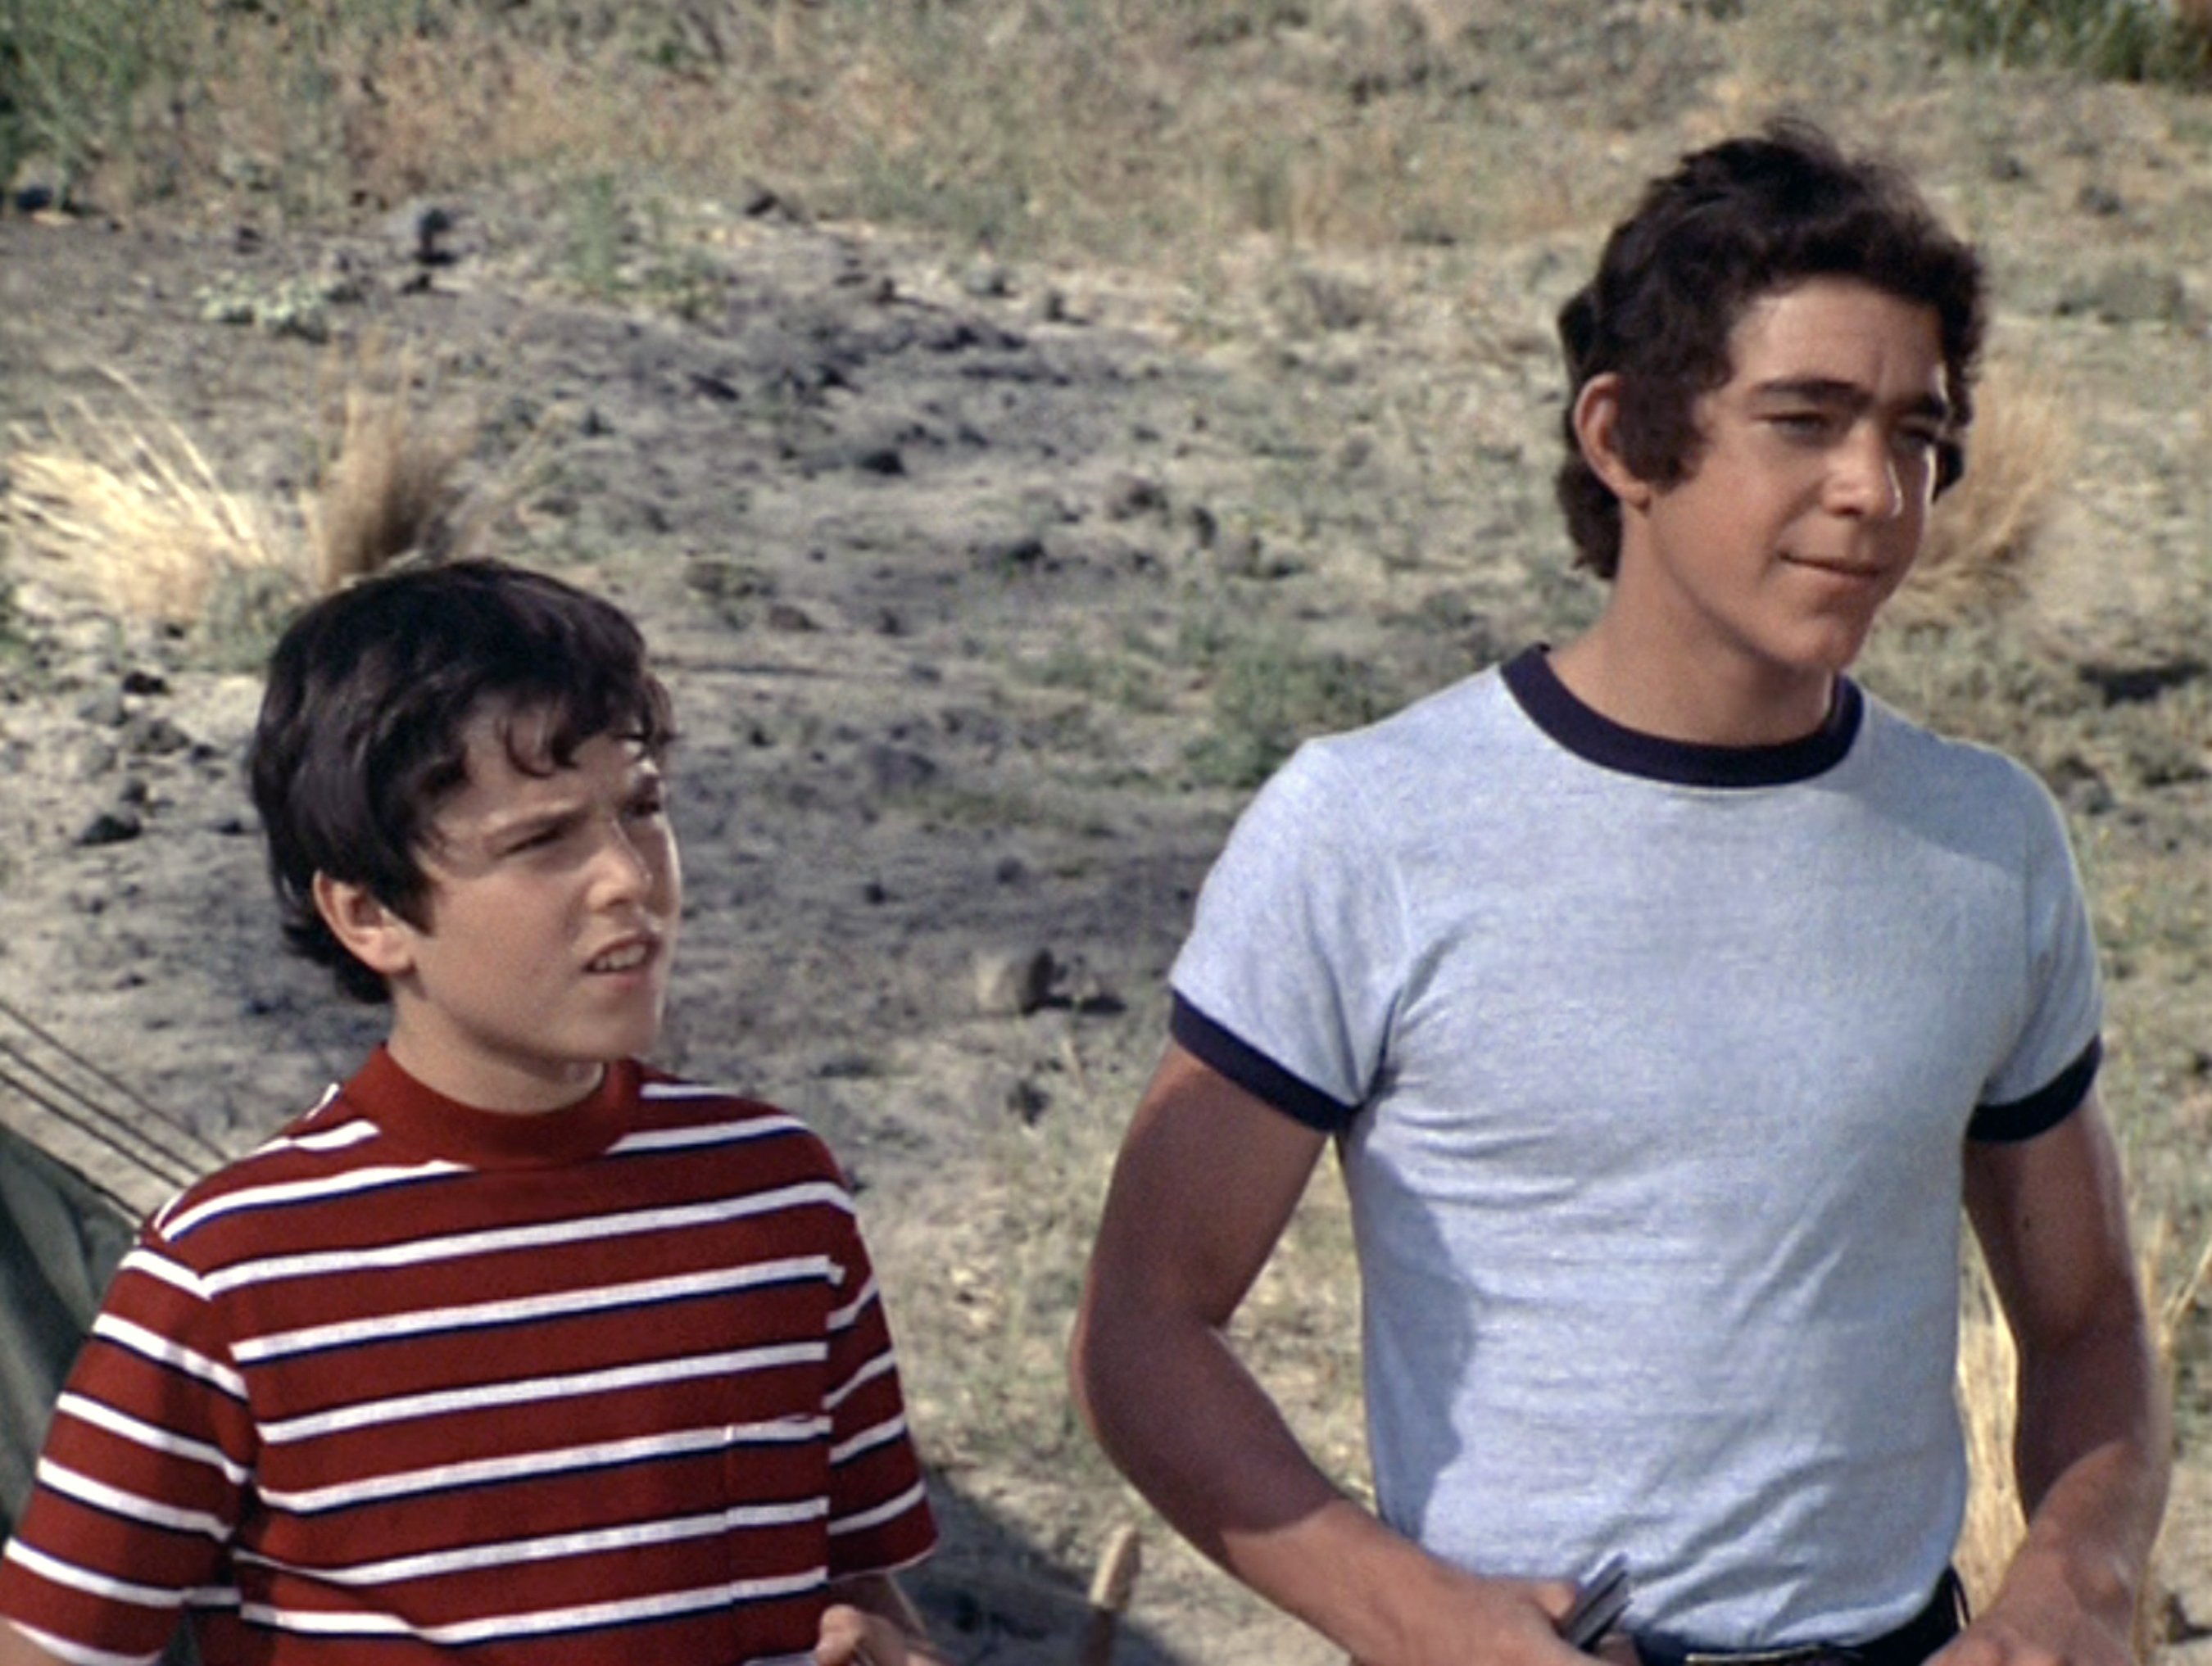 Christopher Knight and Barry Williams in "The Brady Bunch," September 24, 1971 | Source: Getty Images